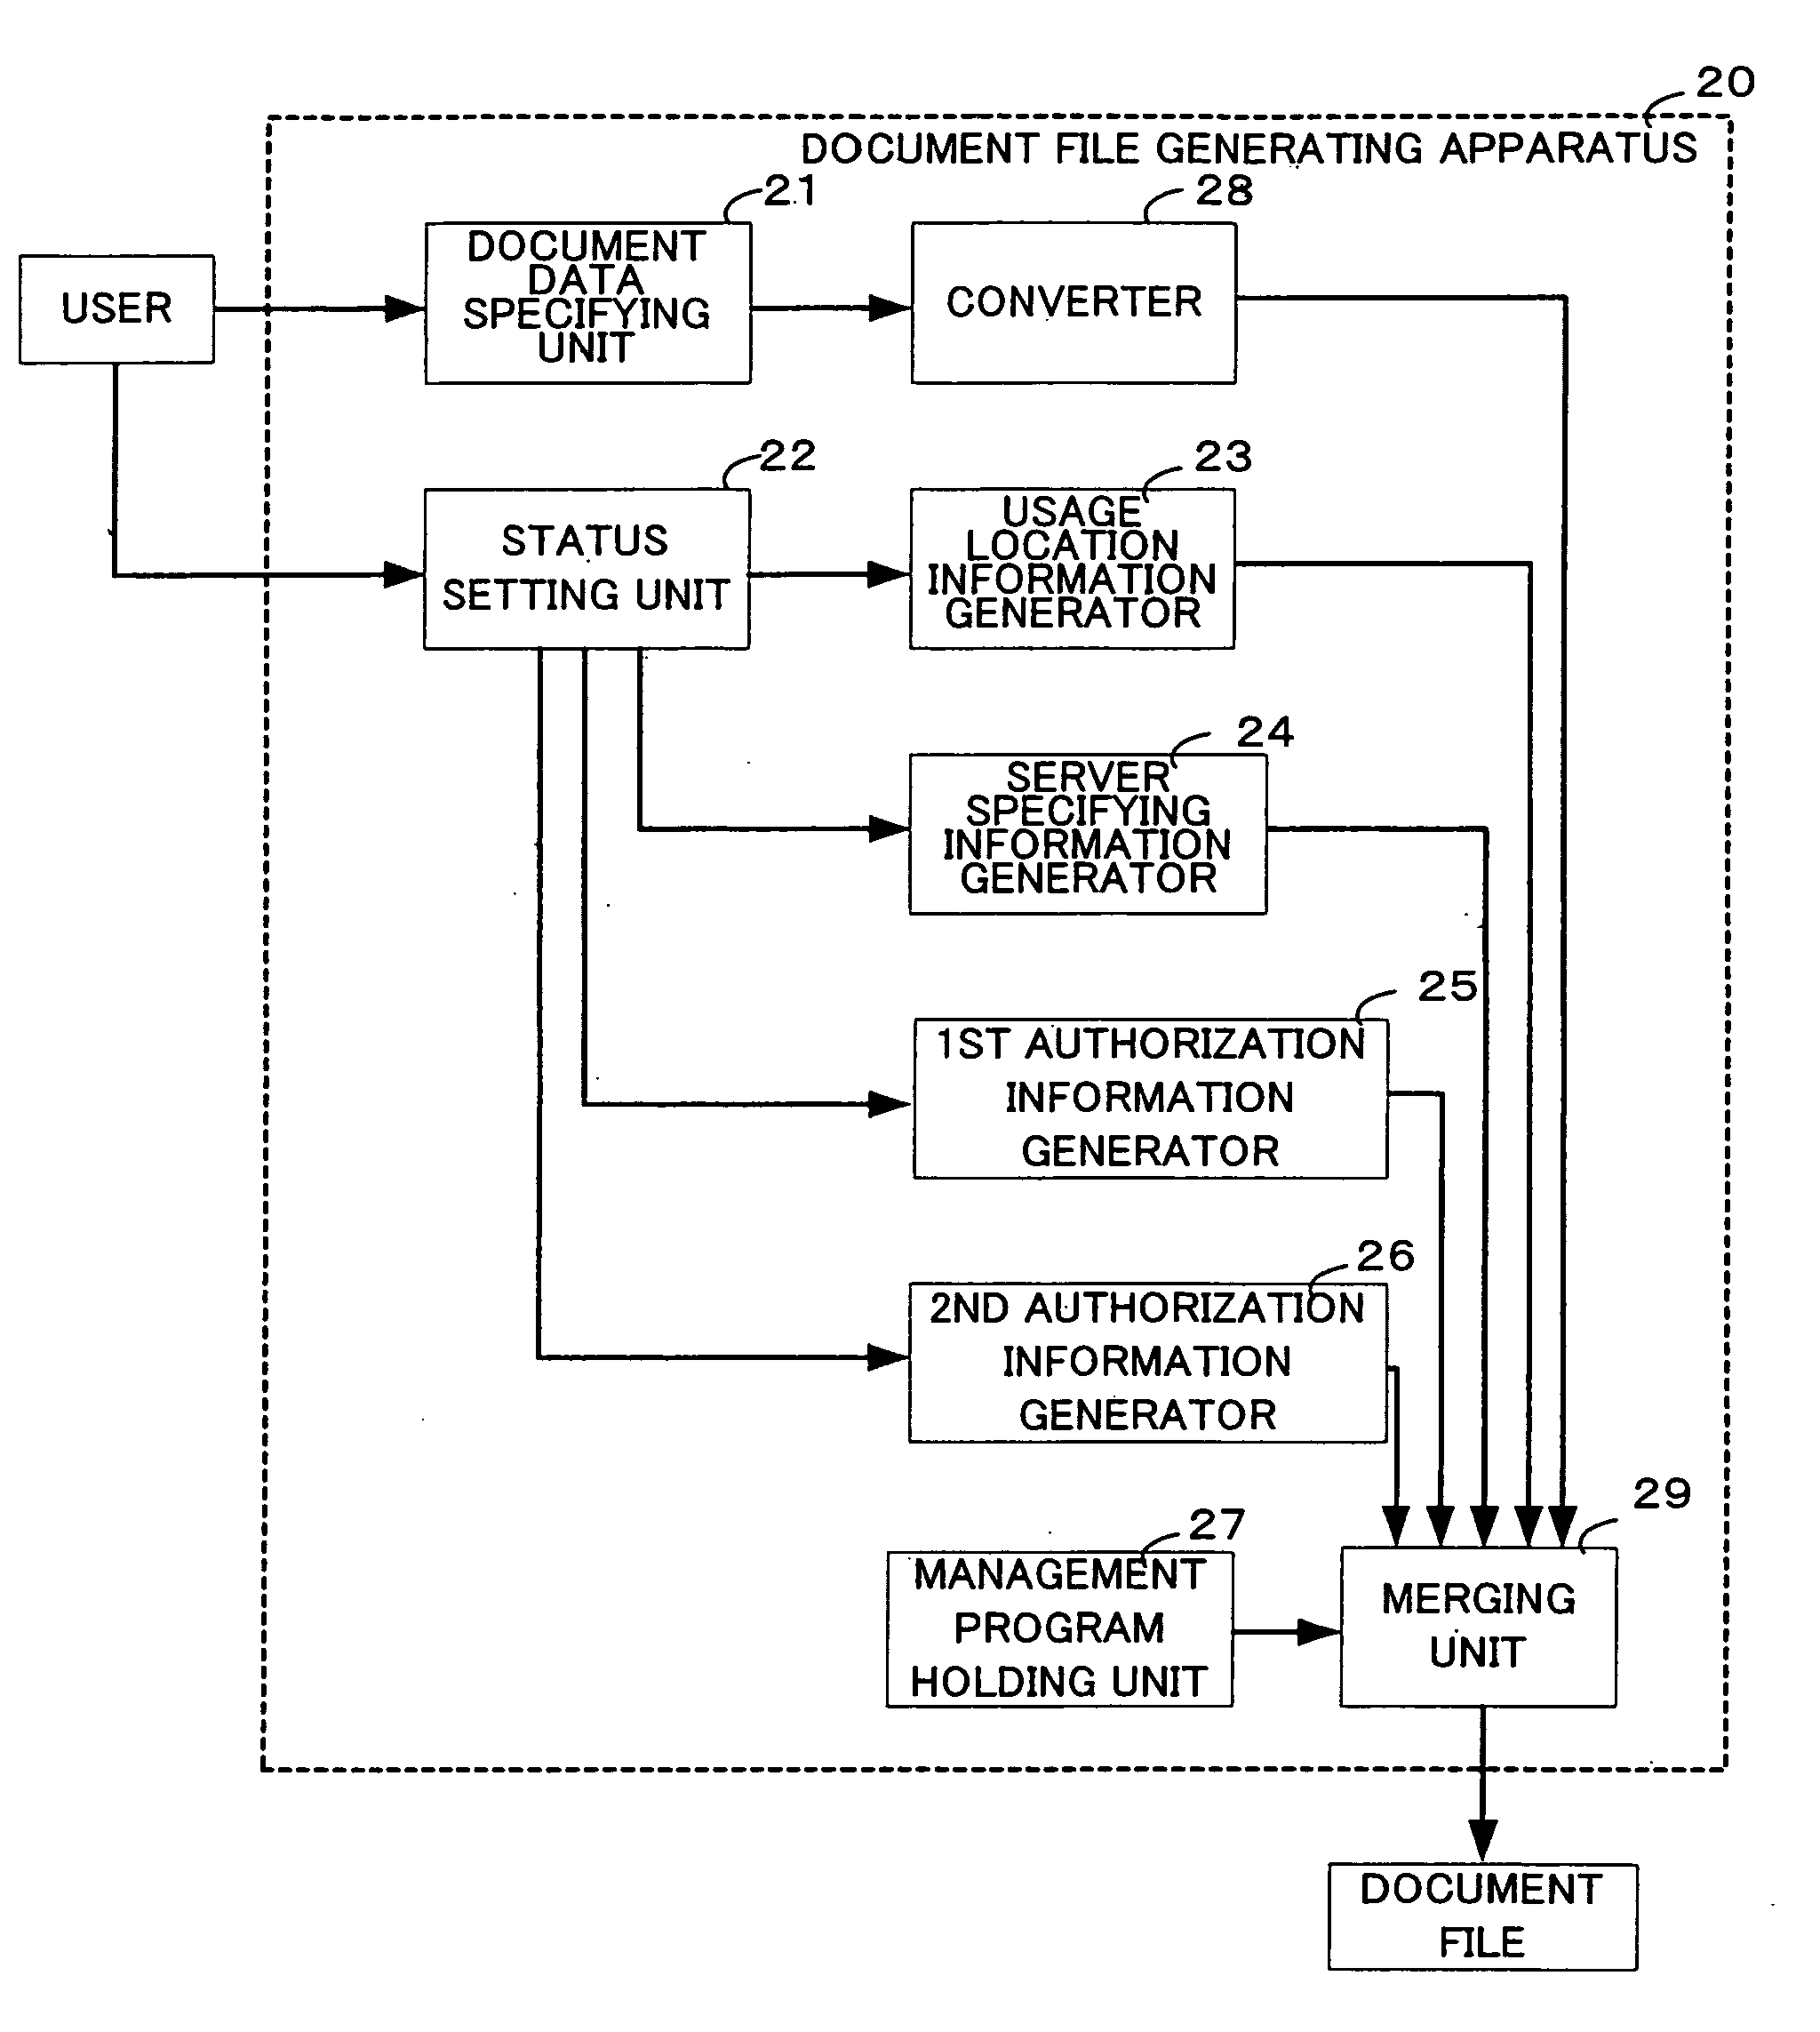 Document file, document file generating apparatus, and document file usage method